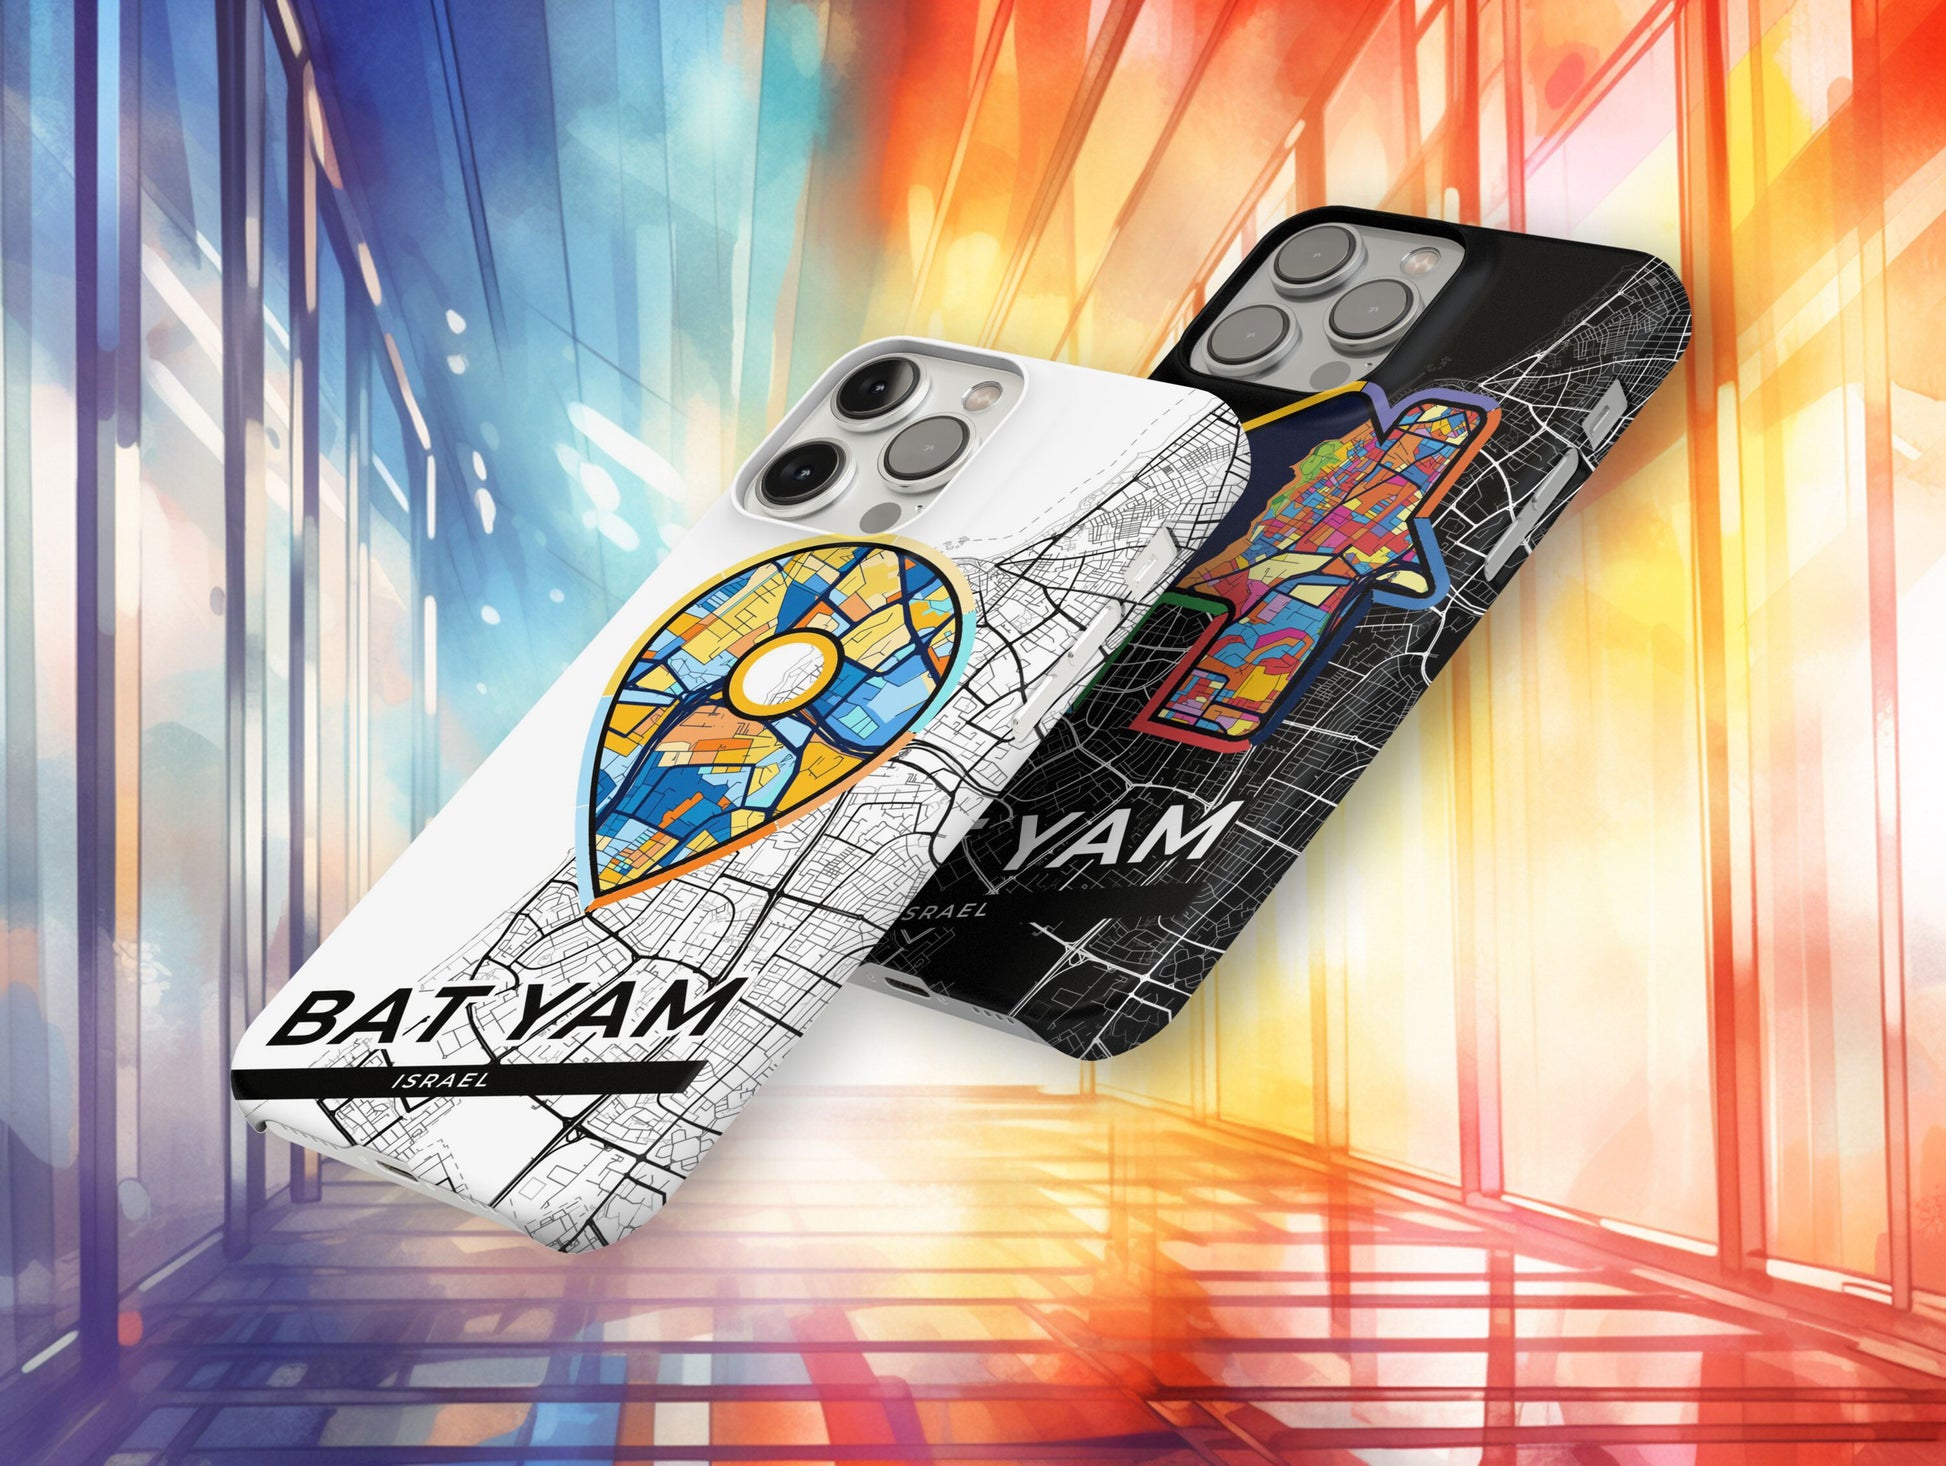 Bat Yam Israel slim phone case with colorful icon. Birthday, wedding or housewarming gift. Couple match cases.